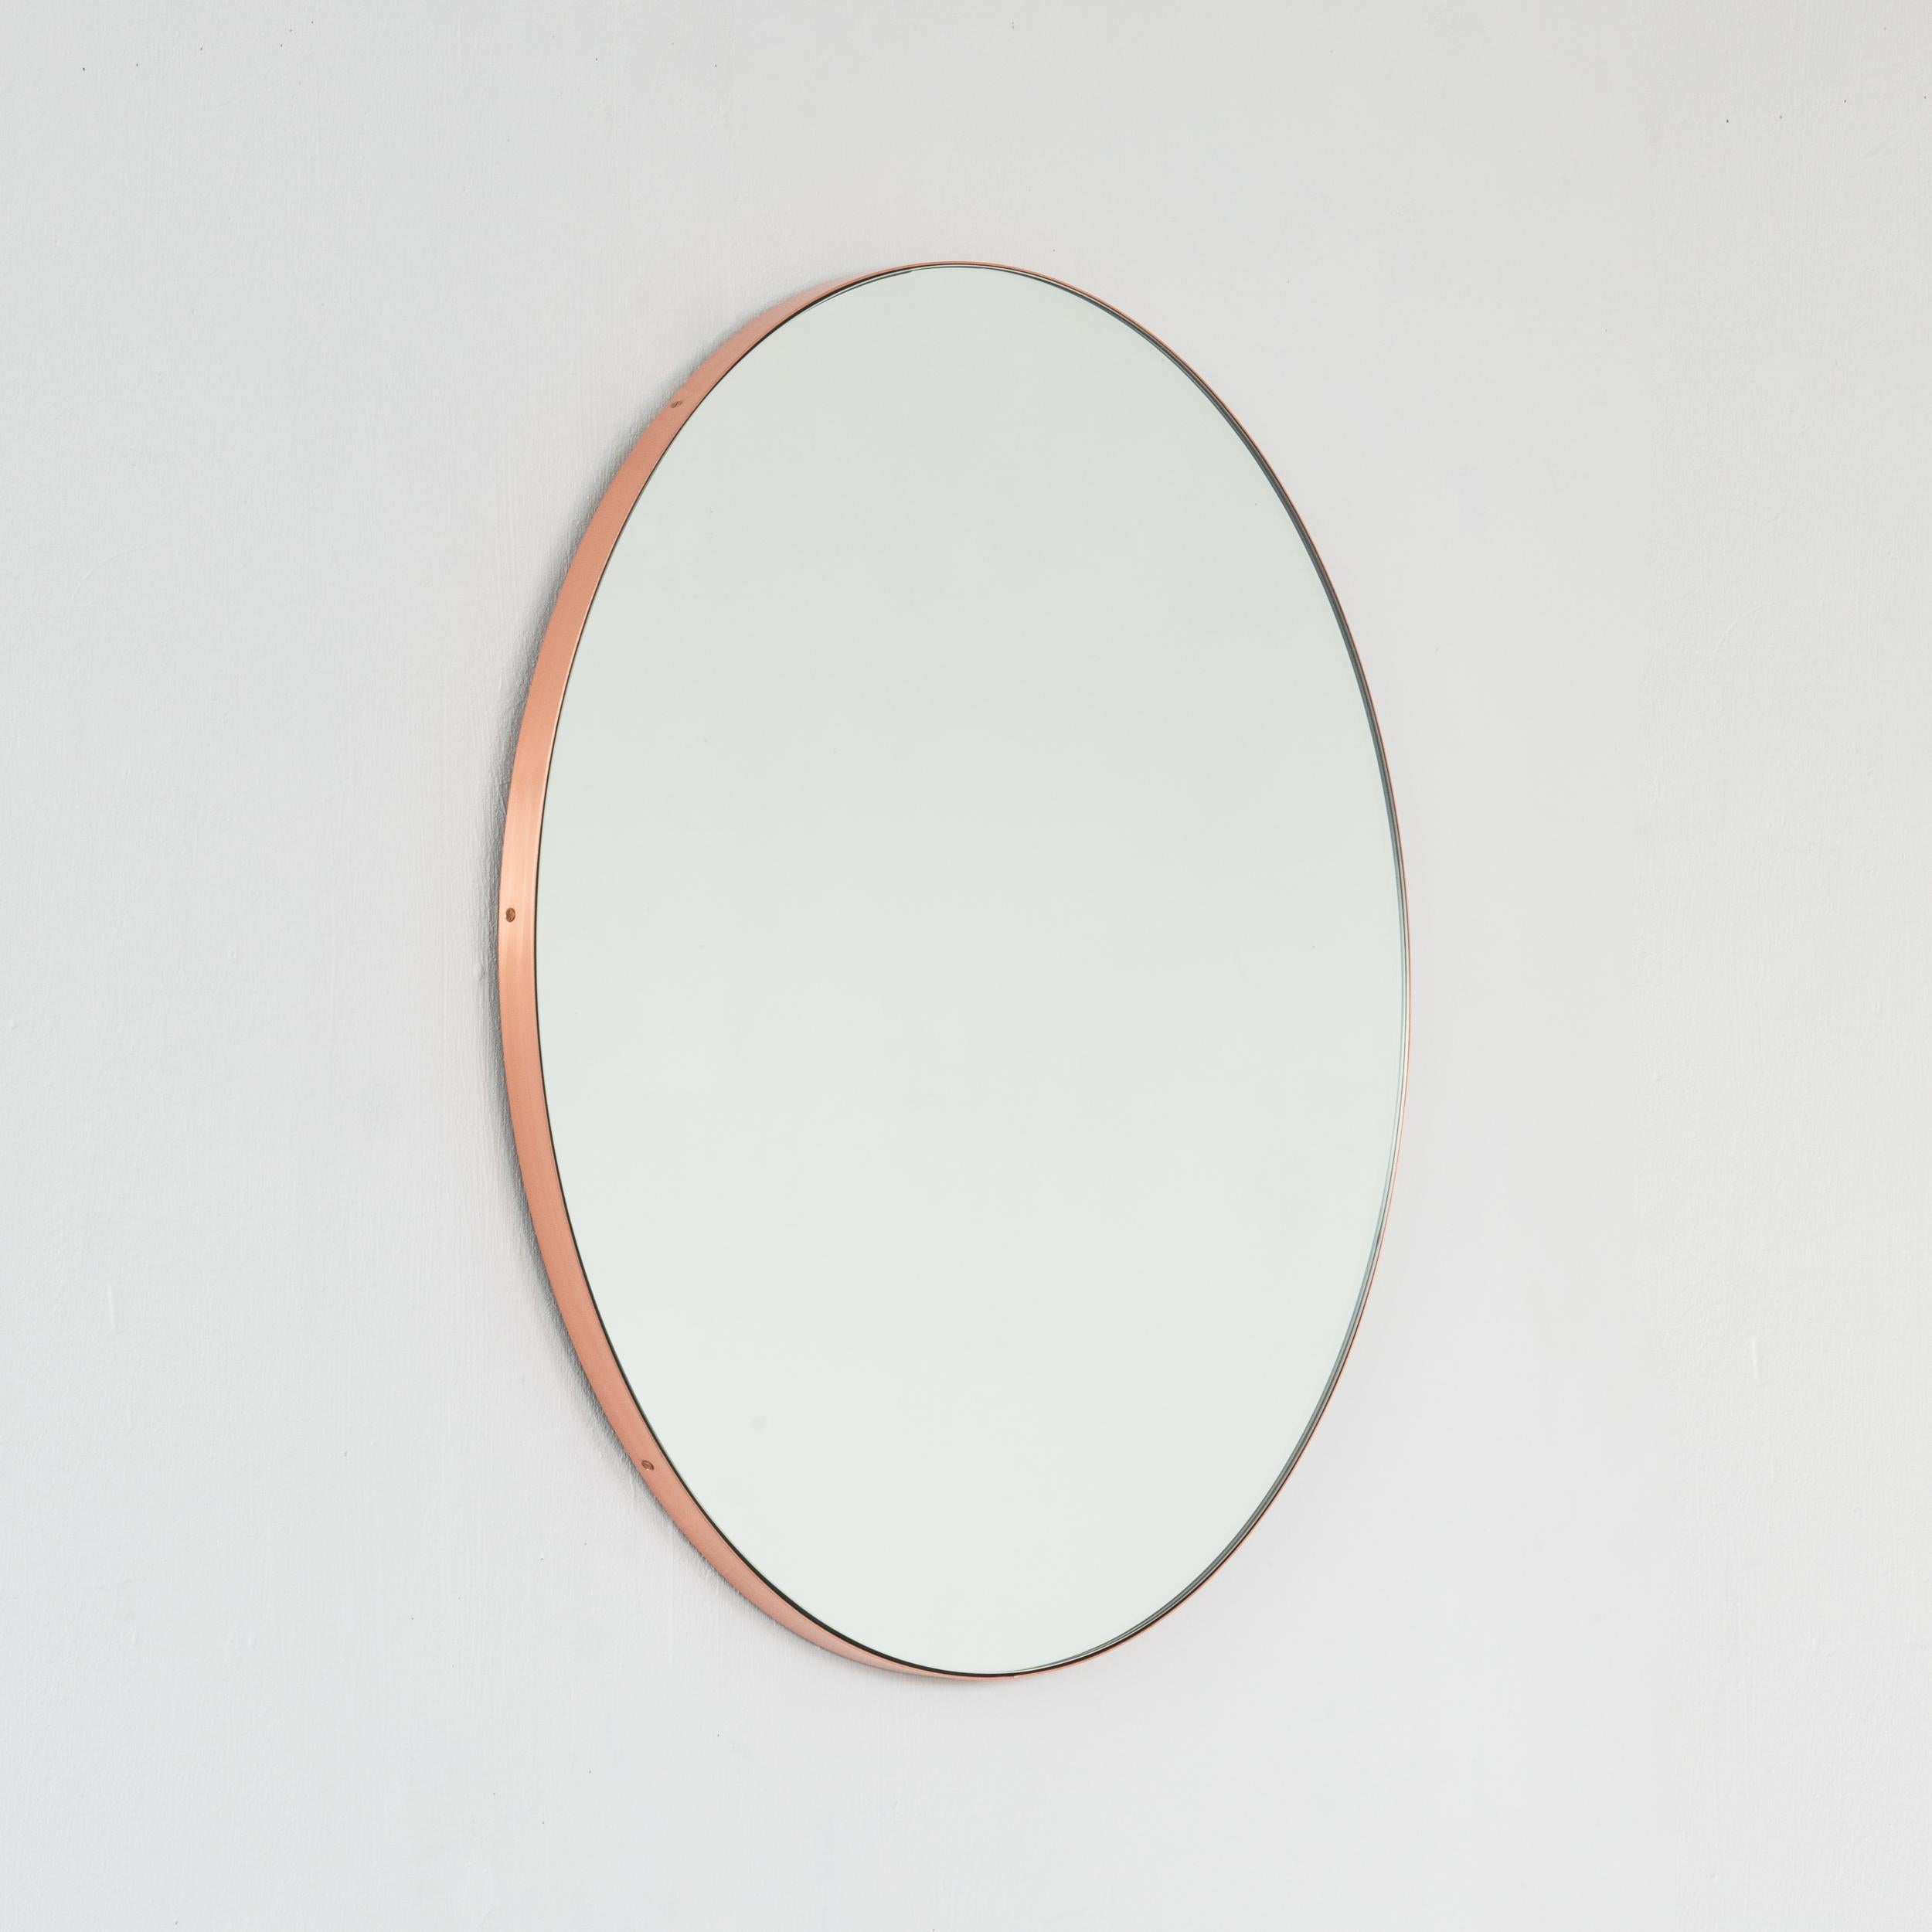 Orbis Round Contemporary Mirror with Copper Frame, Medium For Sale 1